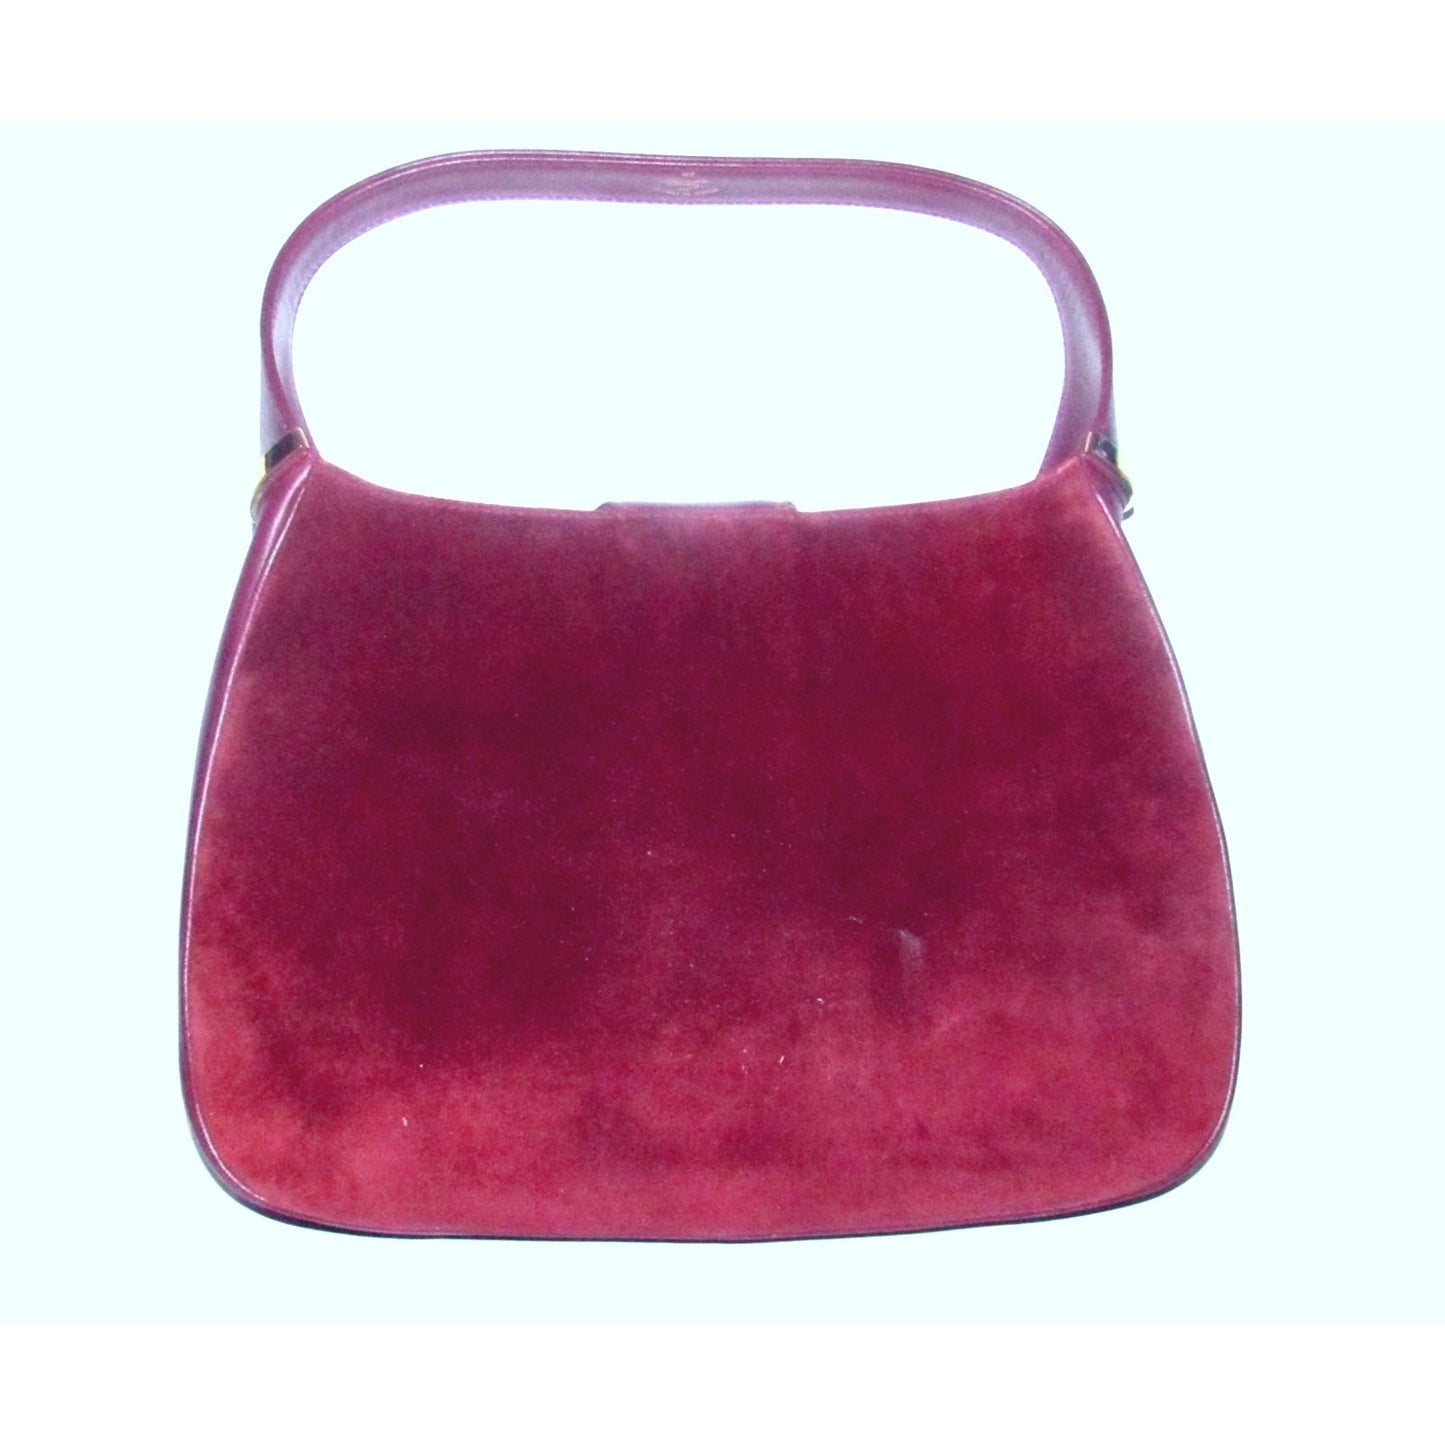 Rare, vintage, Gucci, burgundy leather & suede, unique, 1961 Jackie, hobo style shoulder bag with a two-tone piston closure & flap top